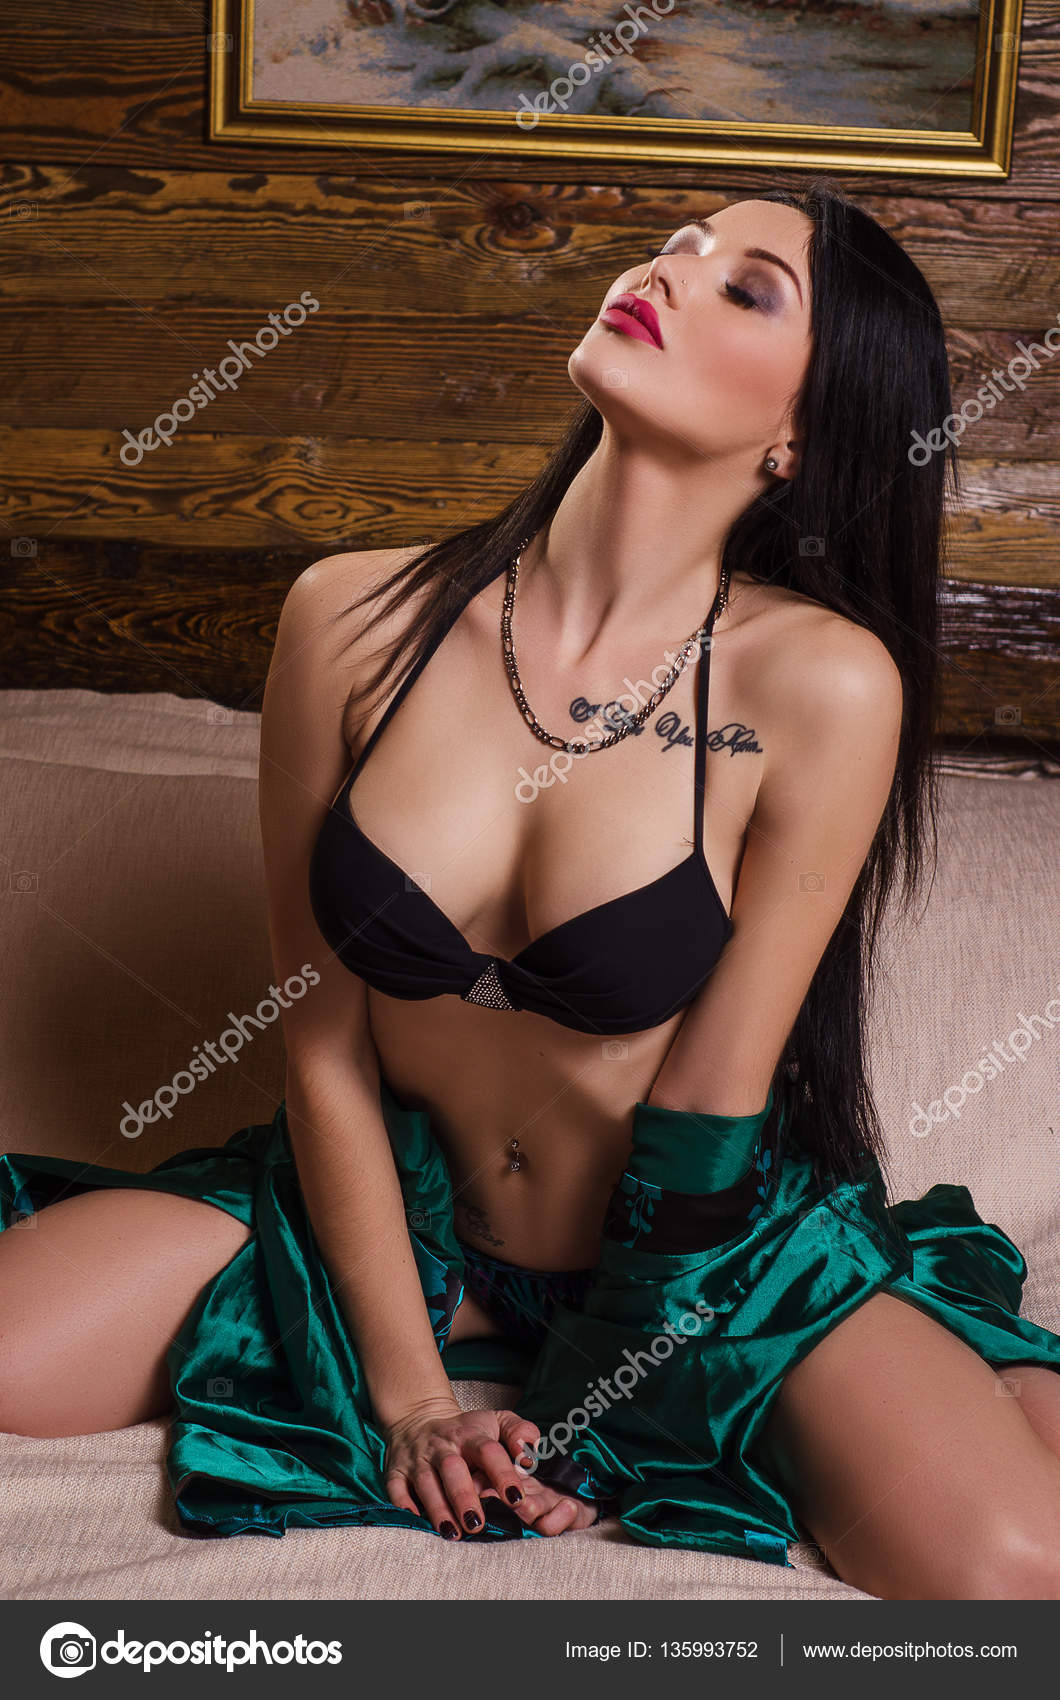 sexy young girl in beautiful lingerie 16095226 Stock Photo at Vecteezy